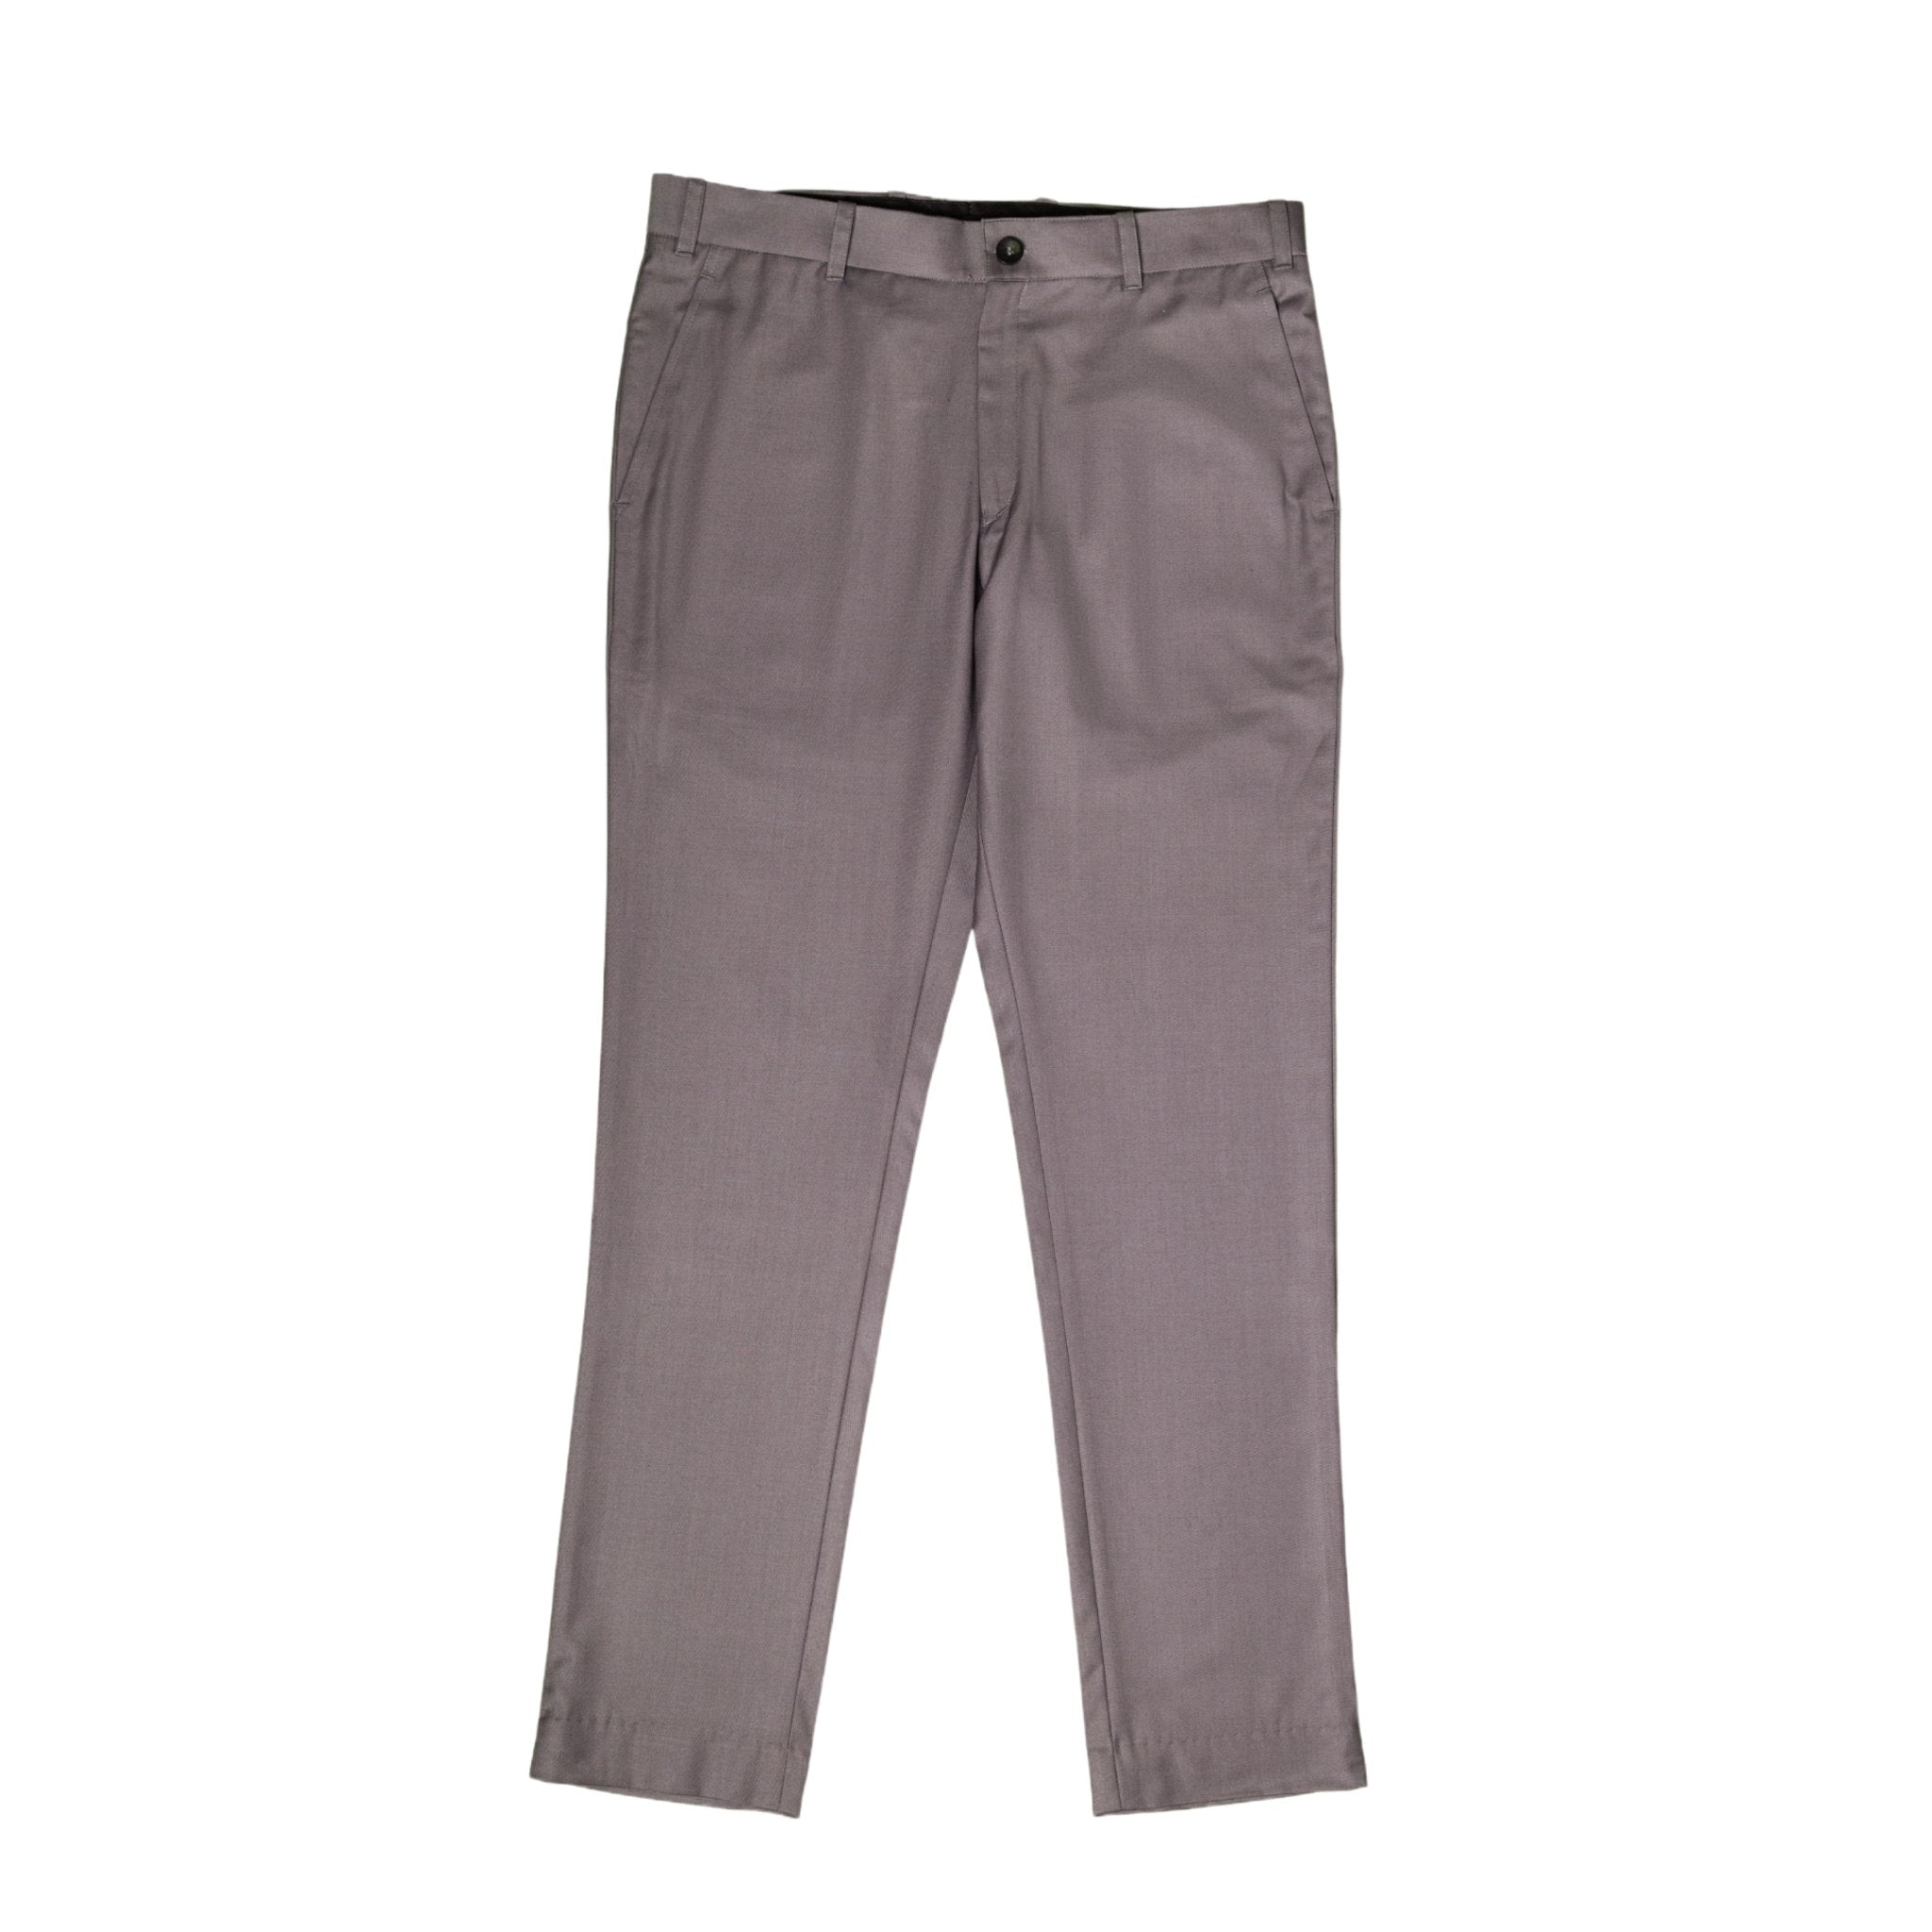 Discover 233+ mens colored pants best